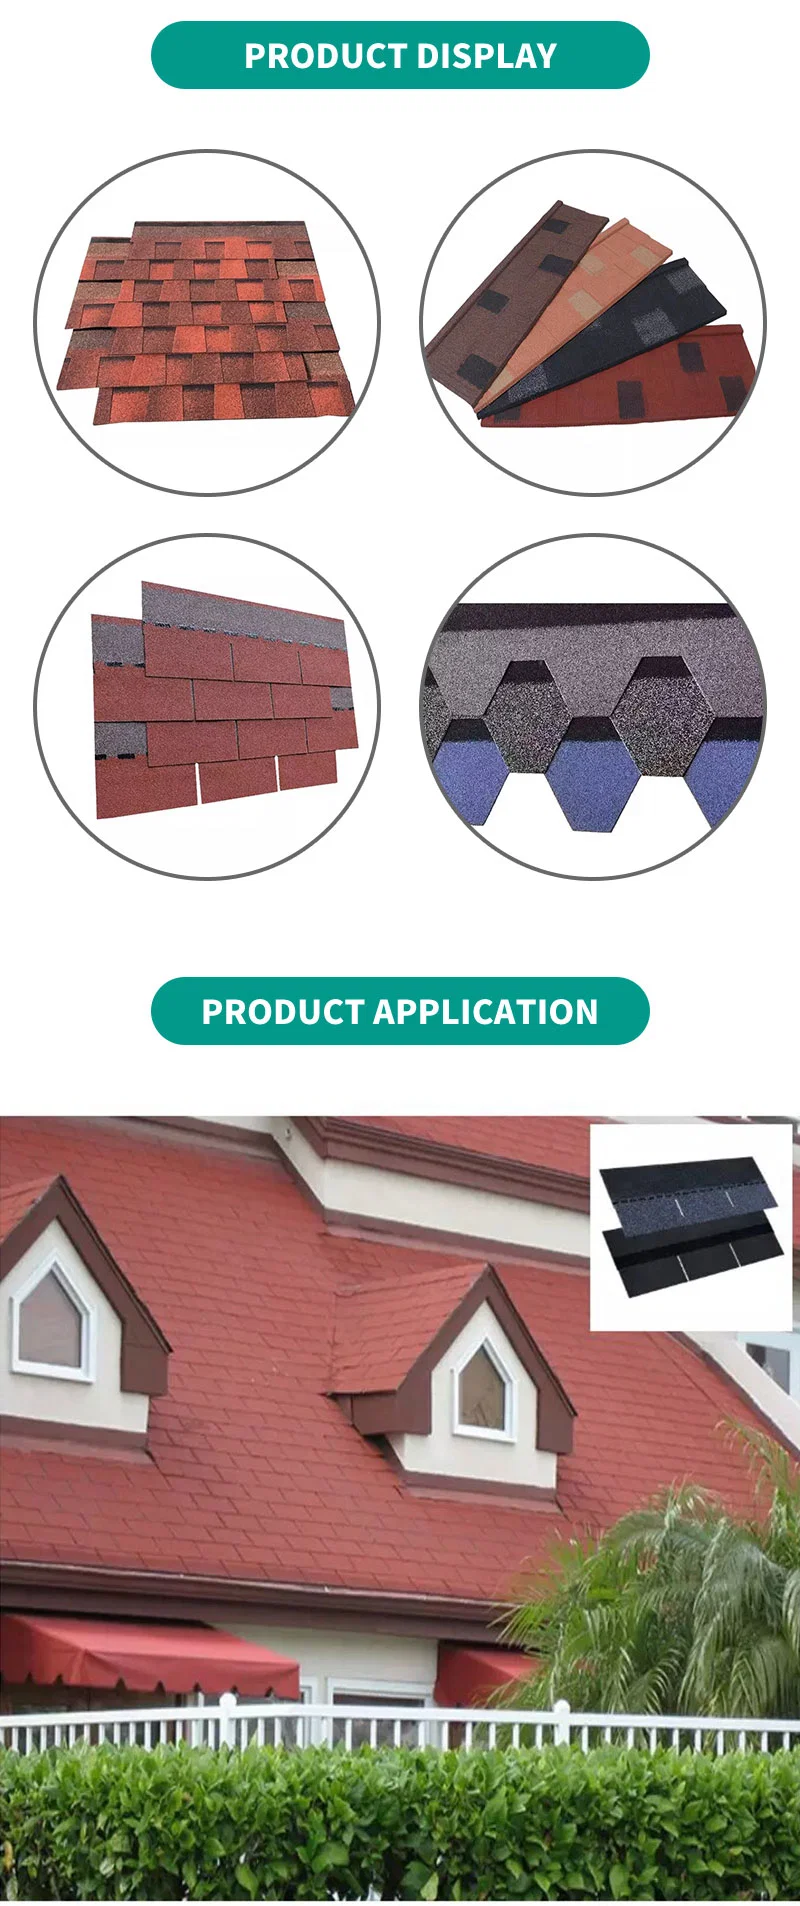 China Cheap Roofing Materials American Asphalt Shingles Materials Fiberglass Laminated Roofing Shingles Price for House Roof